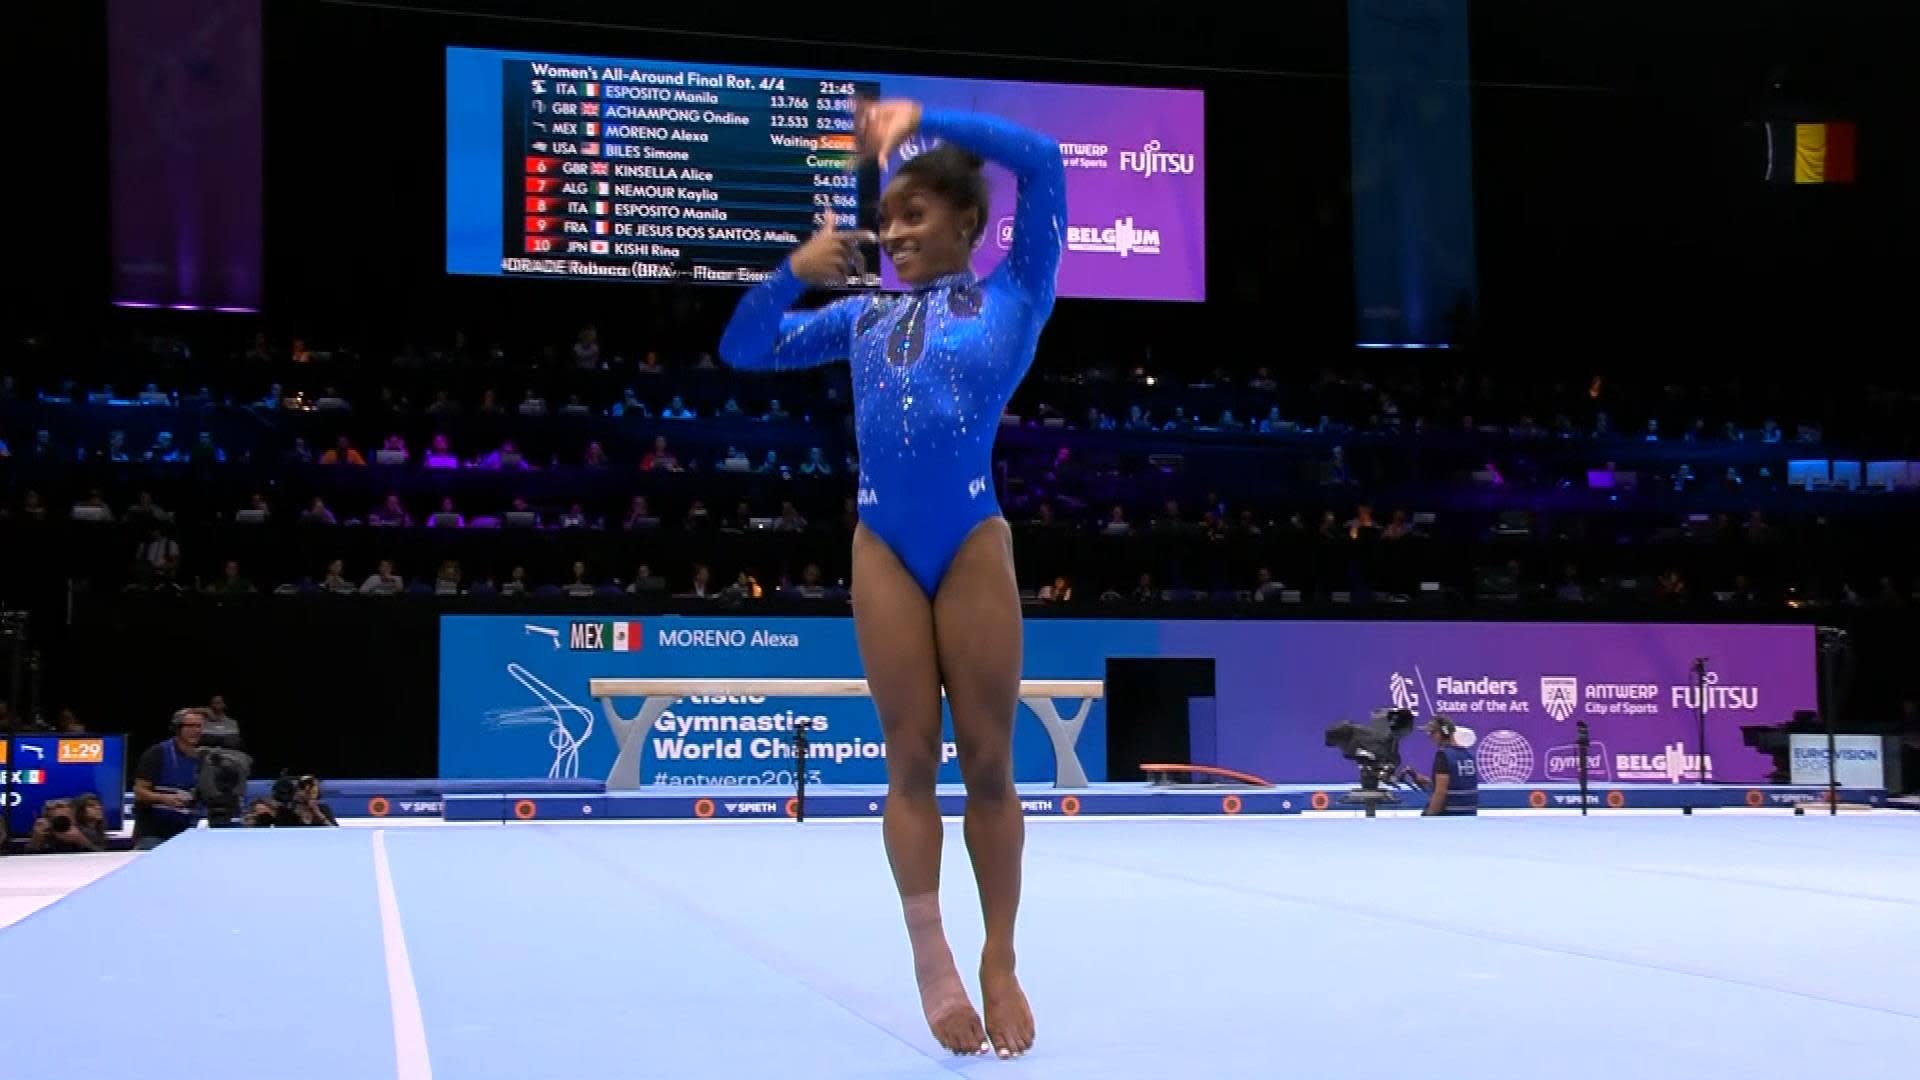 Simone Biles wins 6th all-around title at worlds to become most